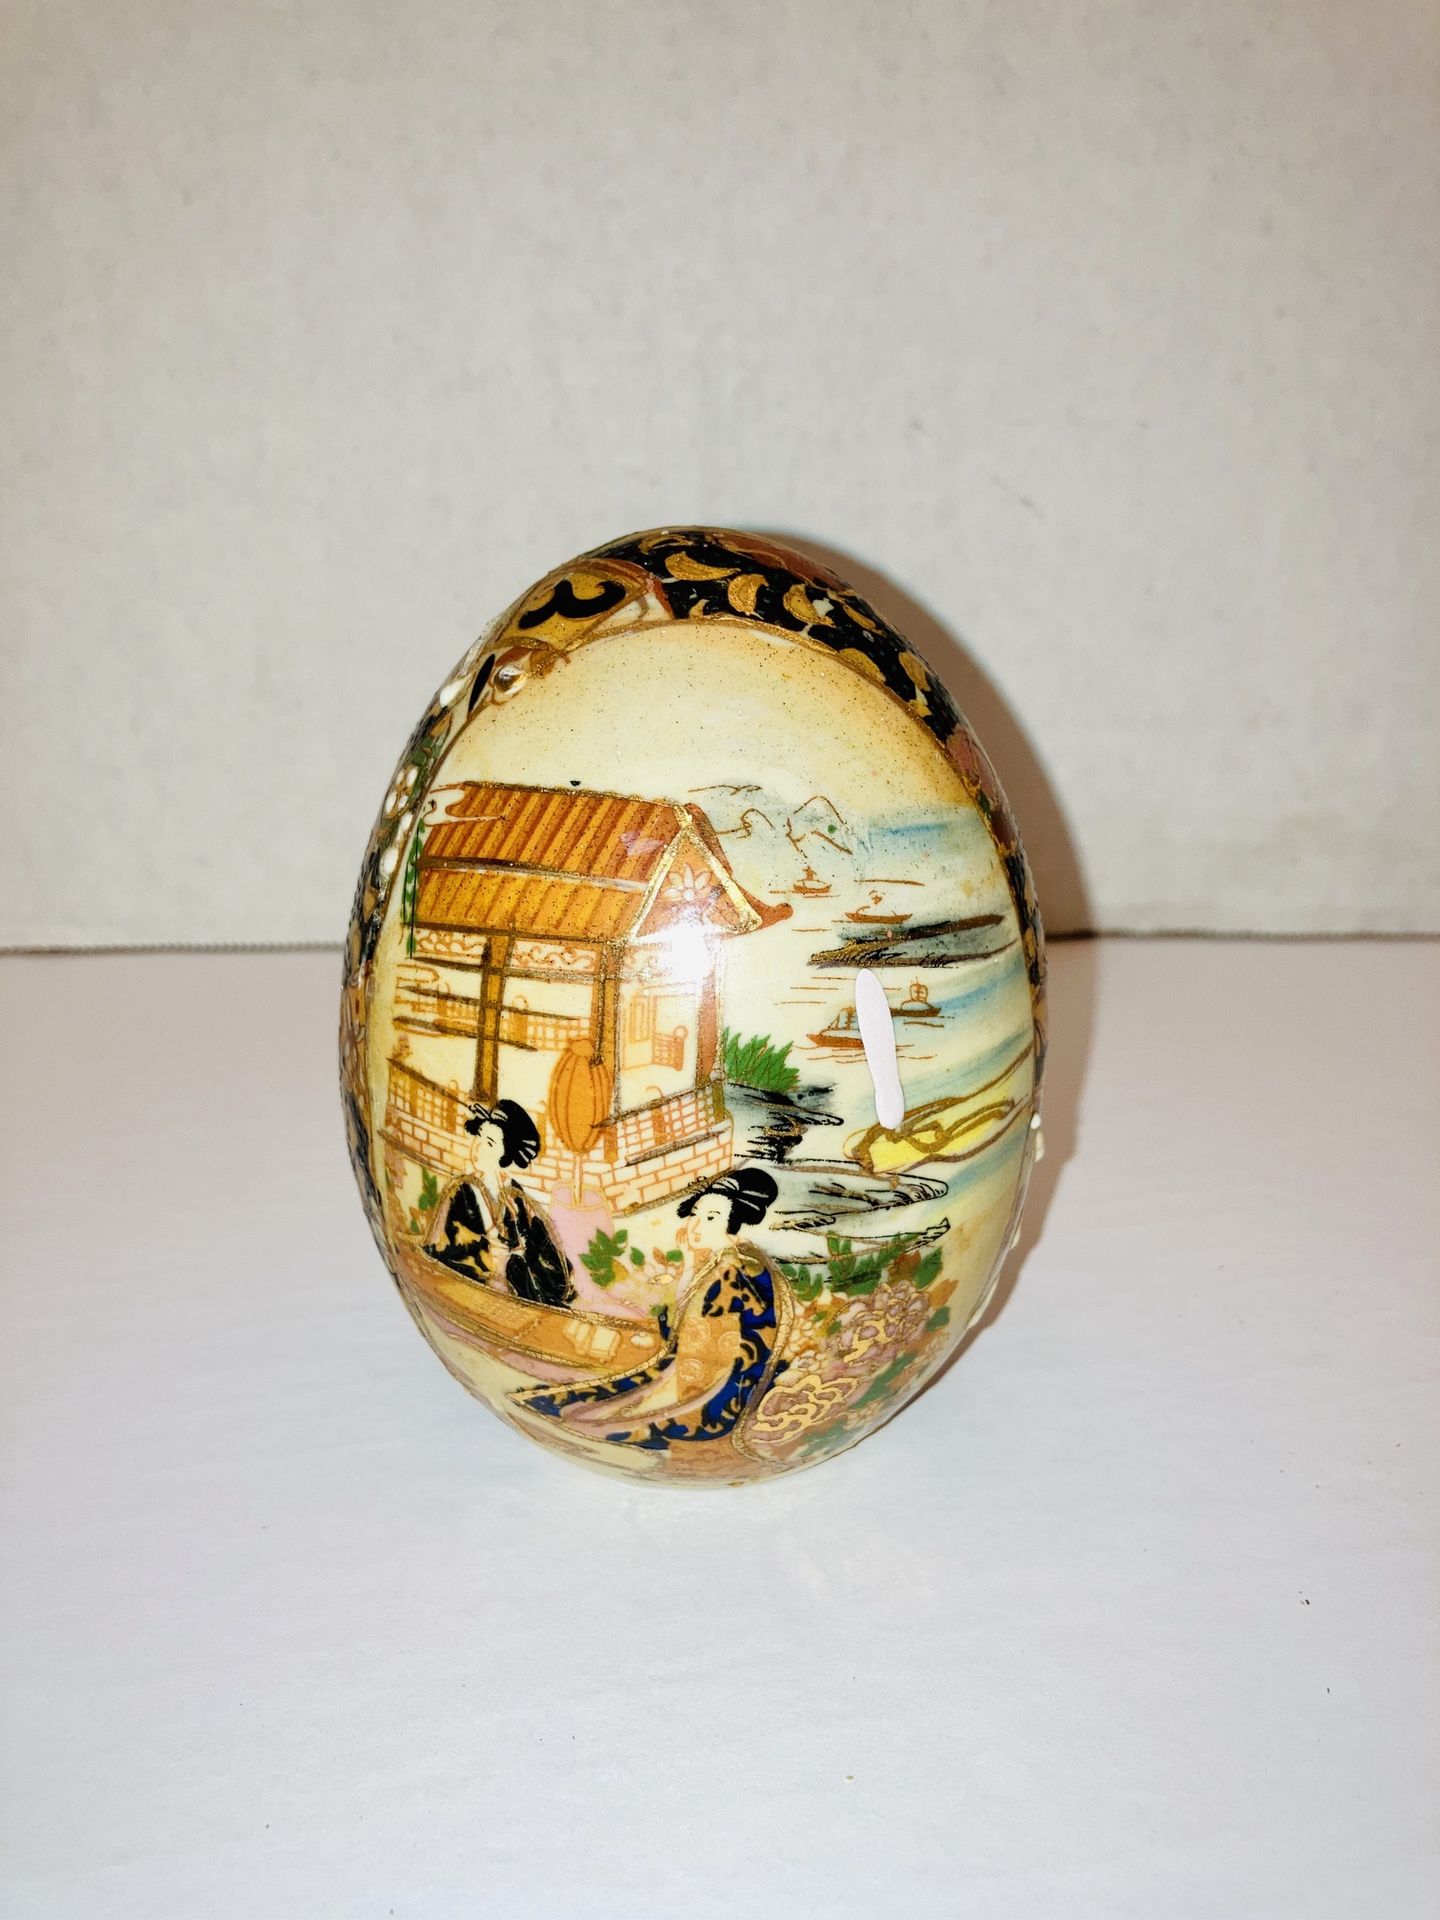 Vintage Porcelain Satsuma Egg Hand Painted With Geishas In The Garden Statue